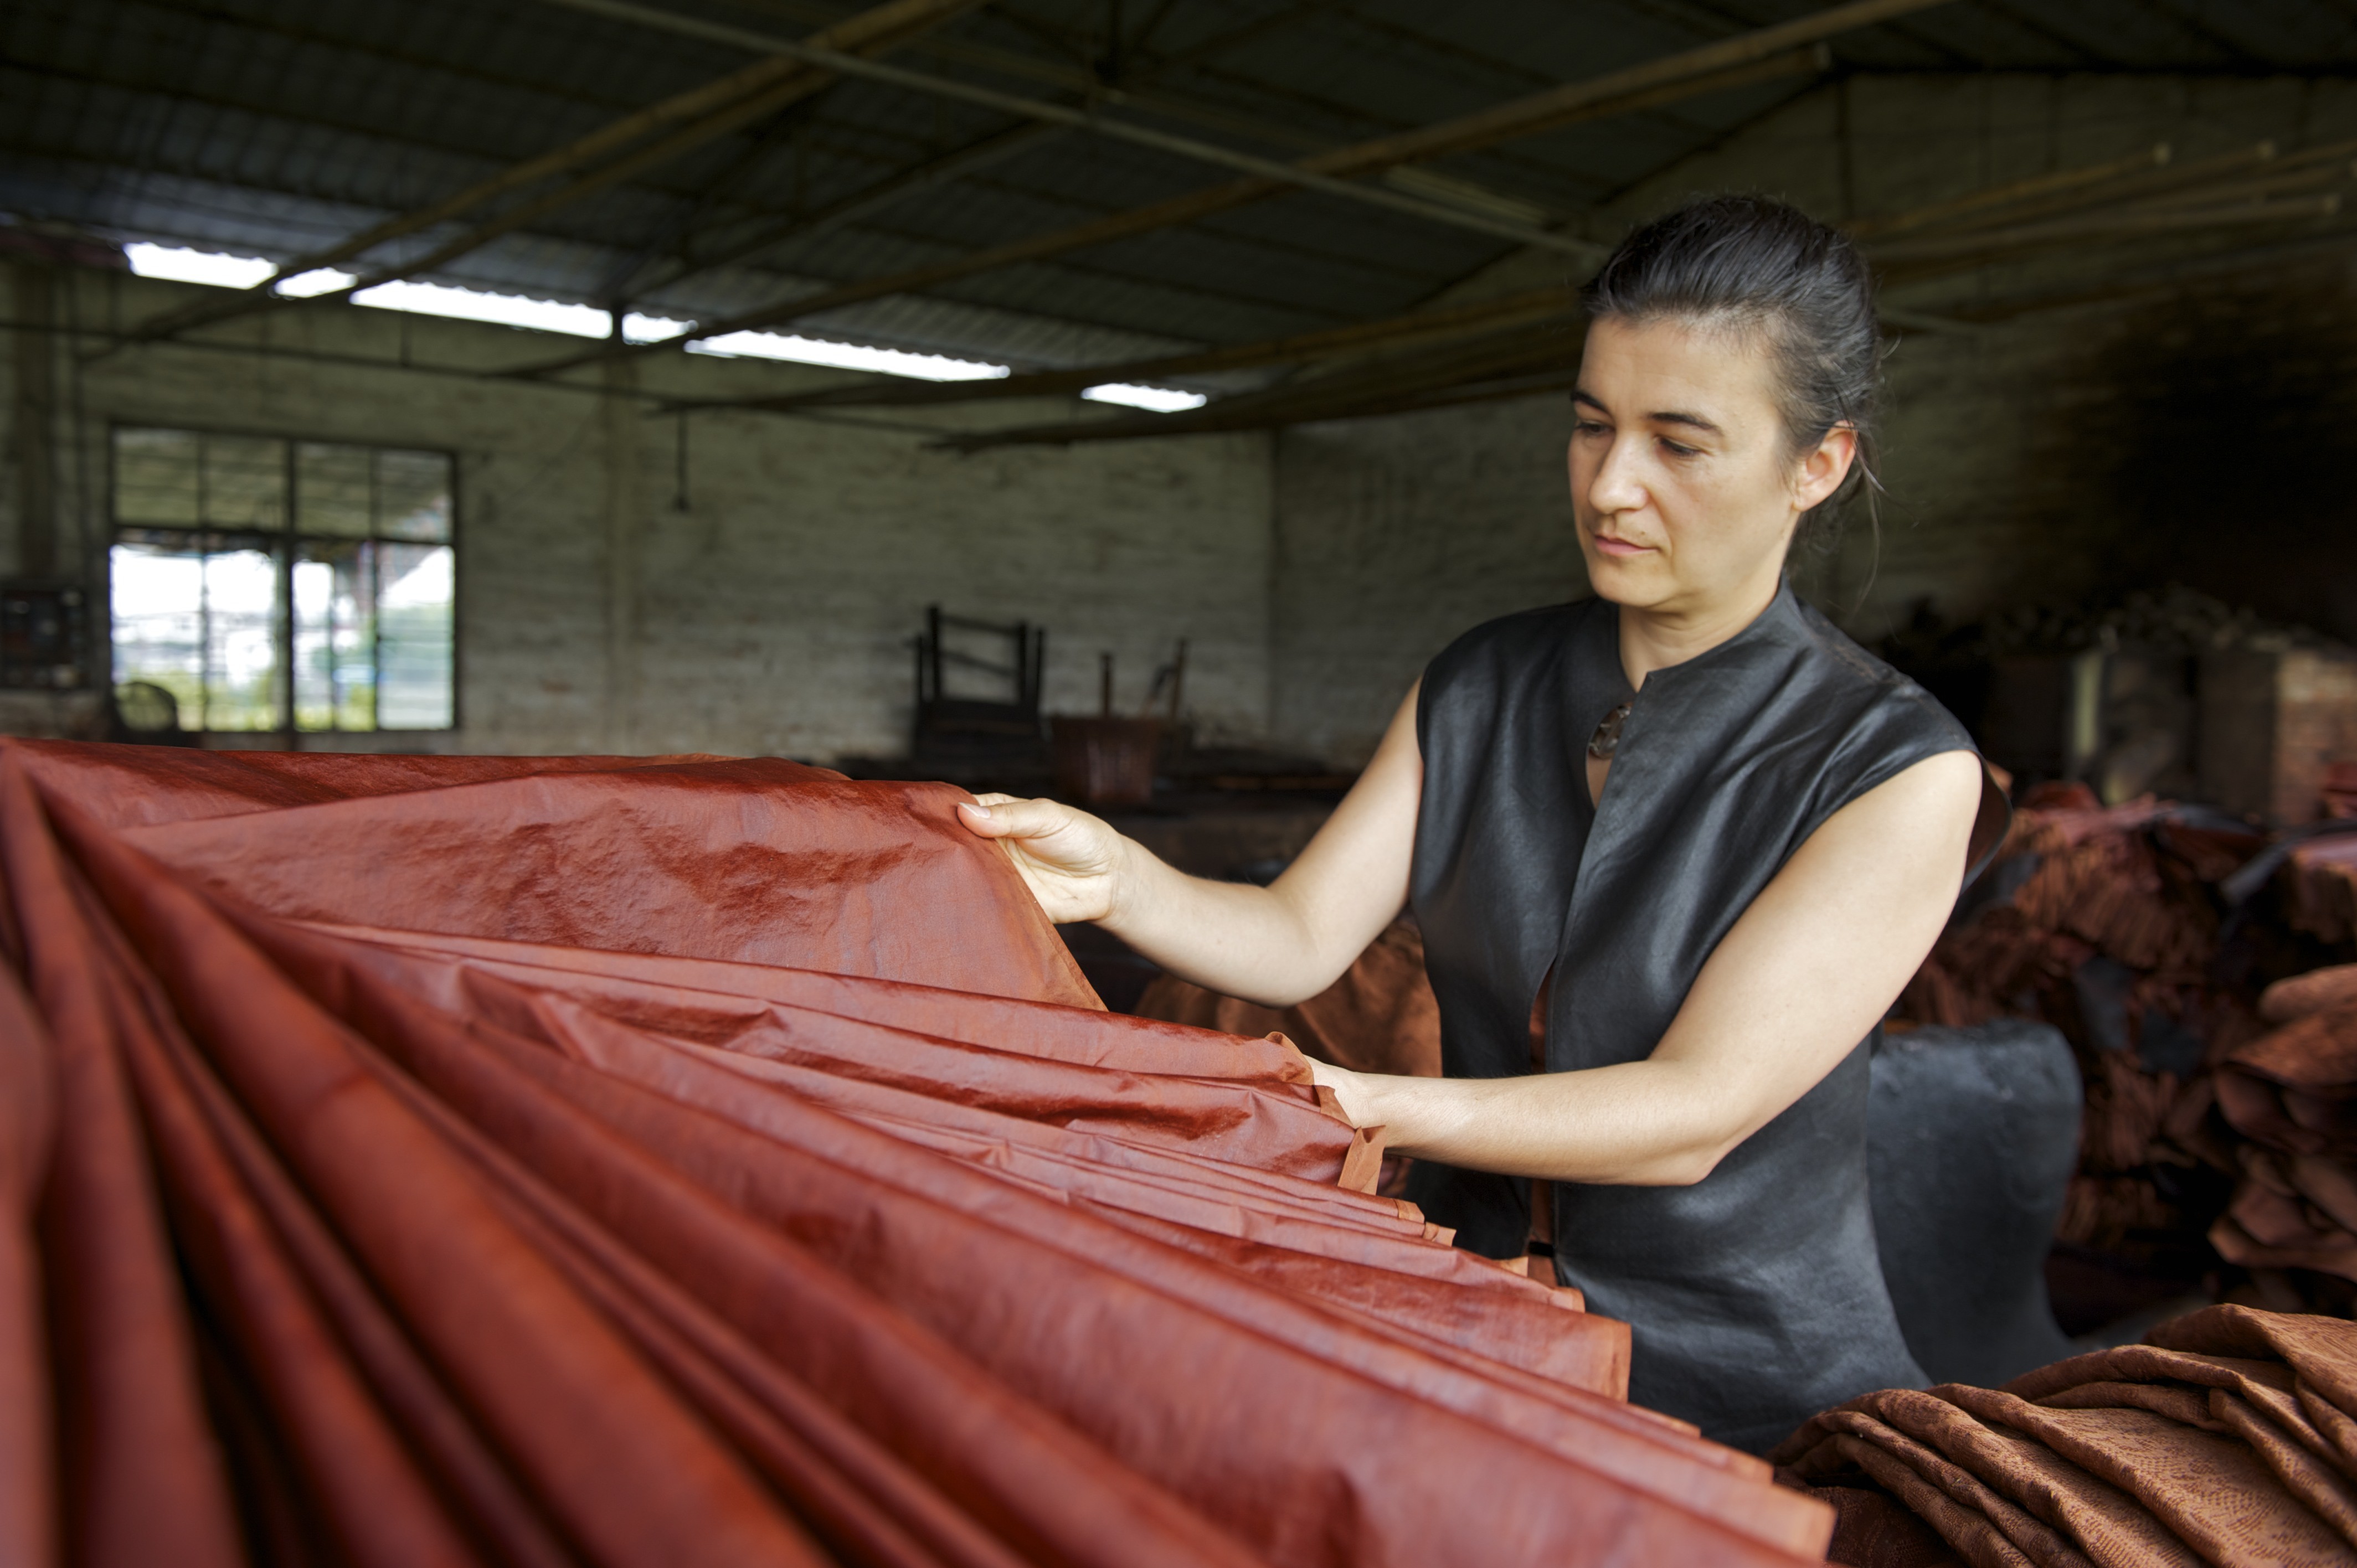 Designer Kathrin von Rechenberg is passionate about working with tea silk. There is a lengthy dyeing and drying process needed to create the fabric.